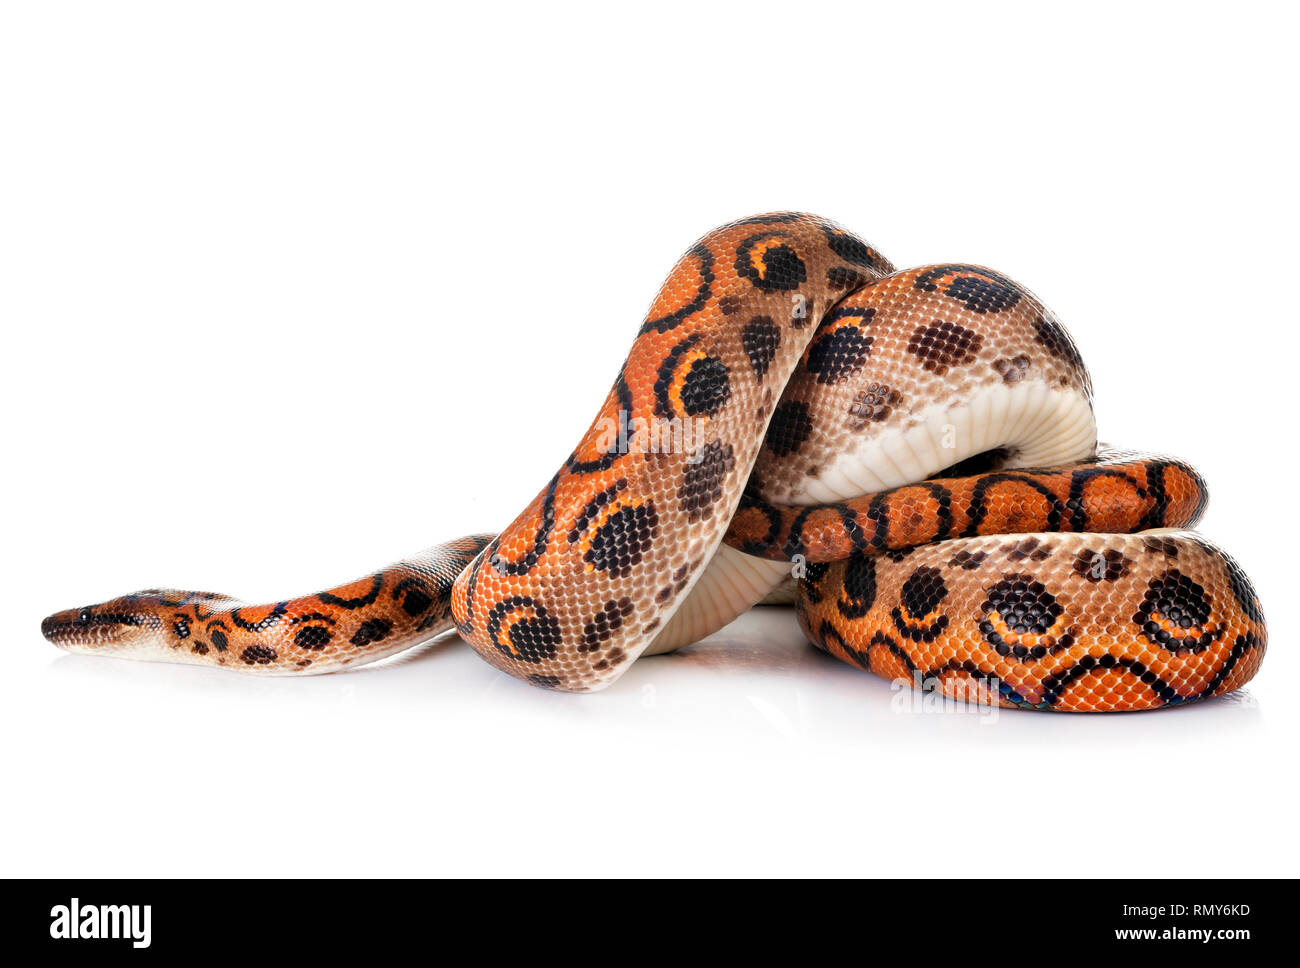 Rainbow boa in front of white background Stock Photo